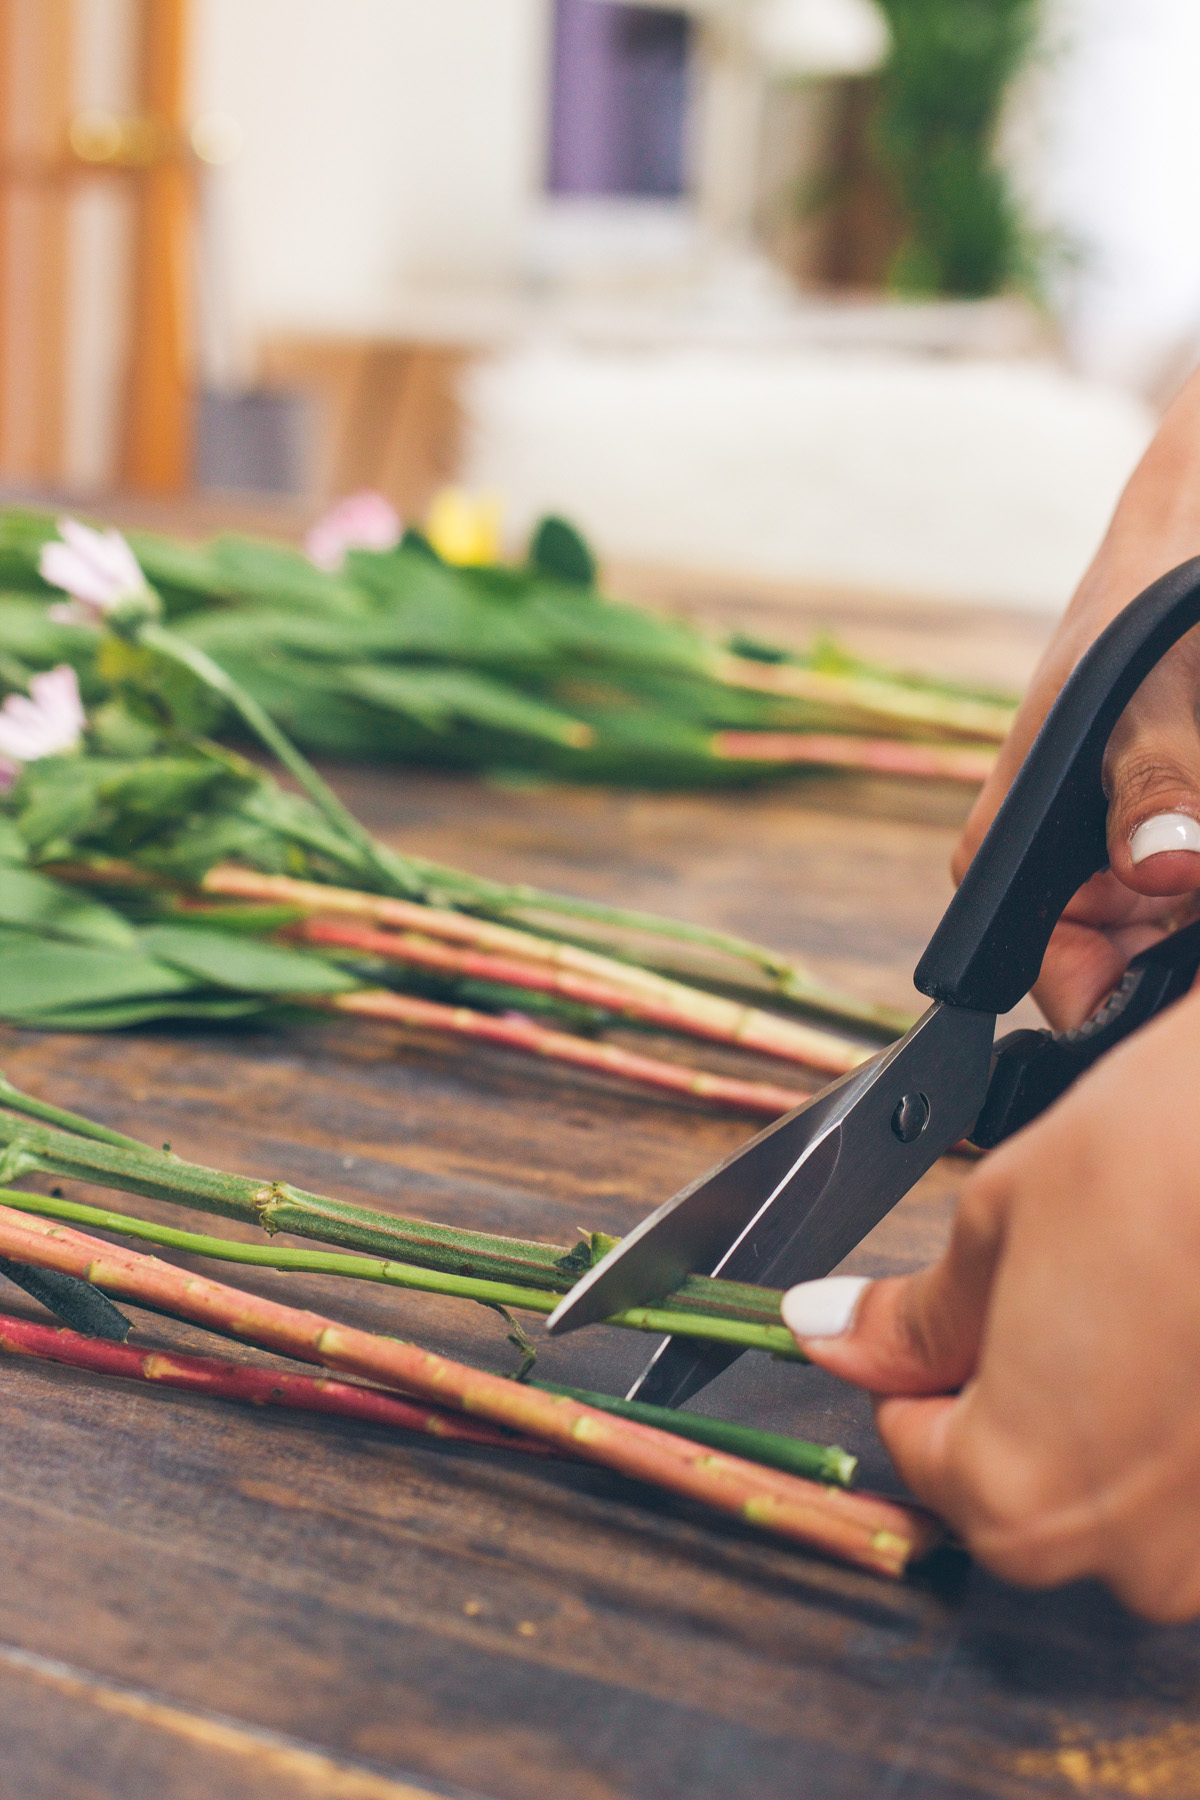 trimming flower stems